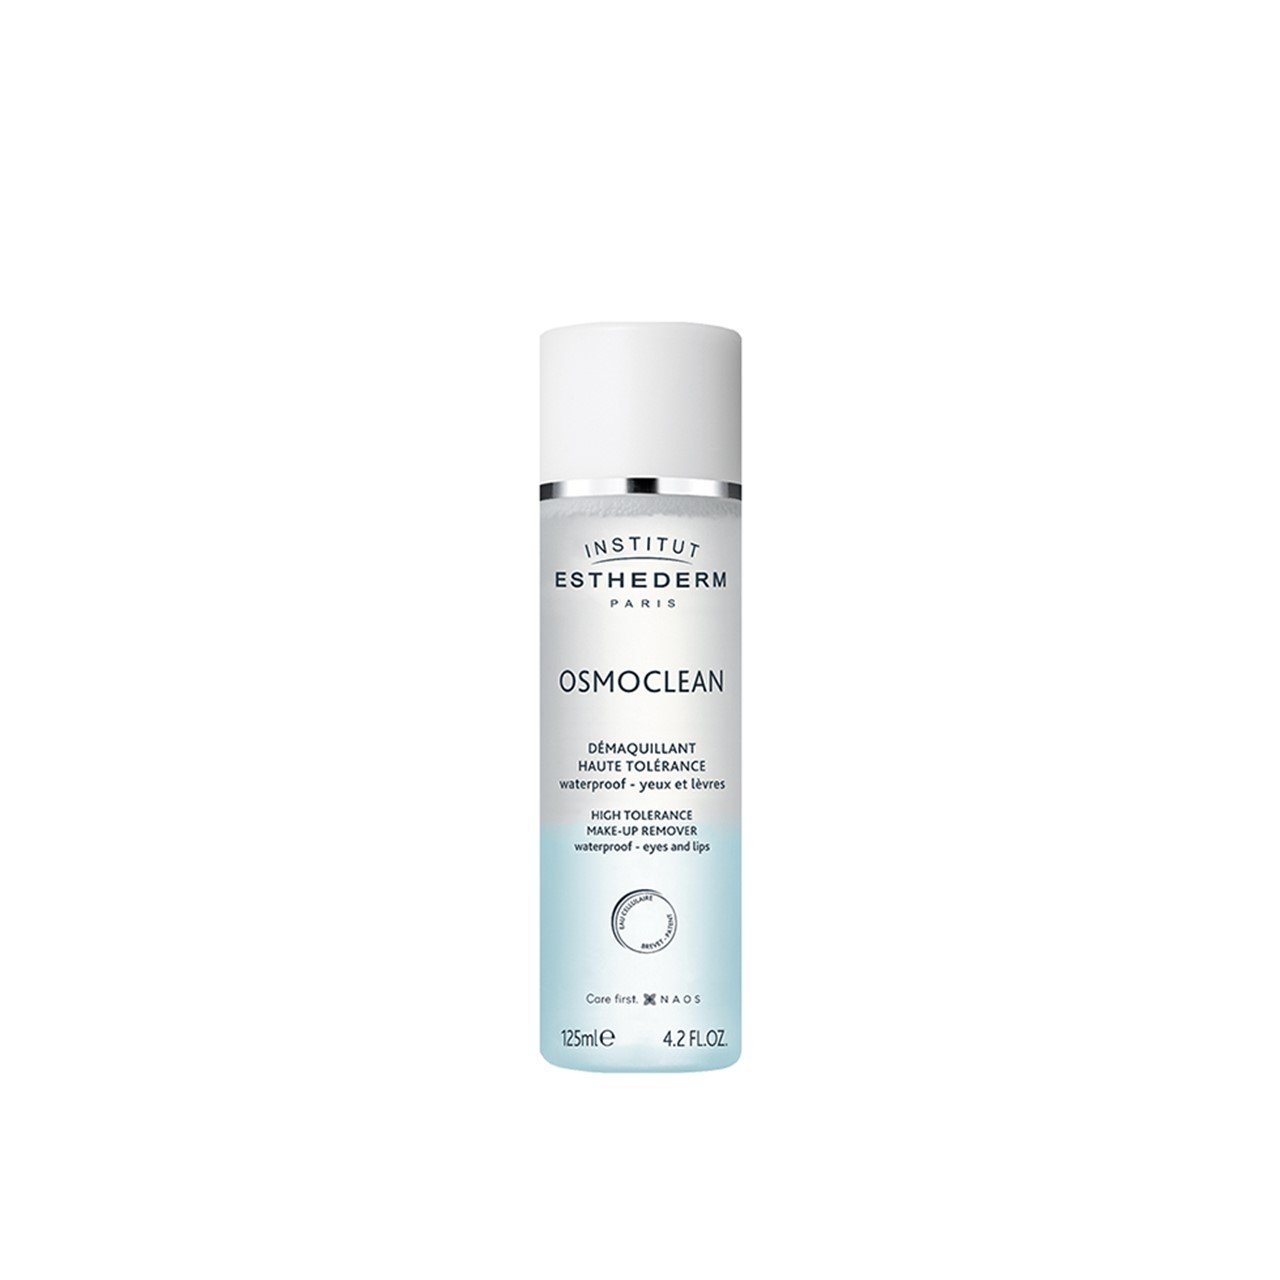 Esthederm Osmoclean High-Tolerance Waterproof Make-up Remover 125ml